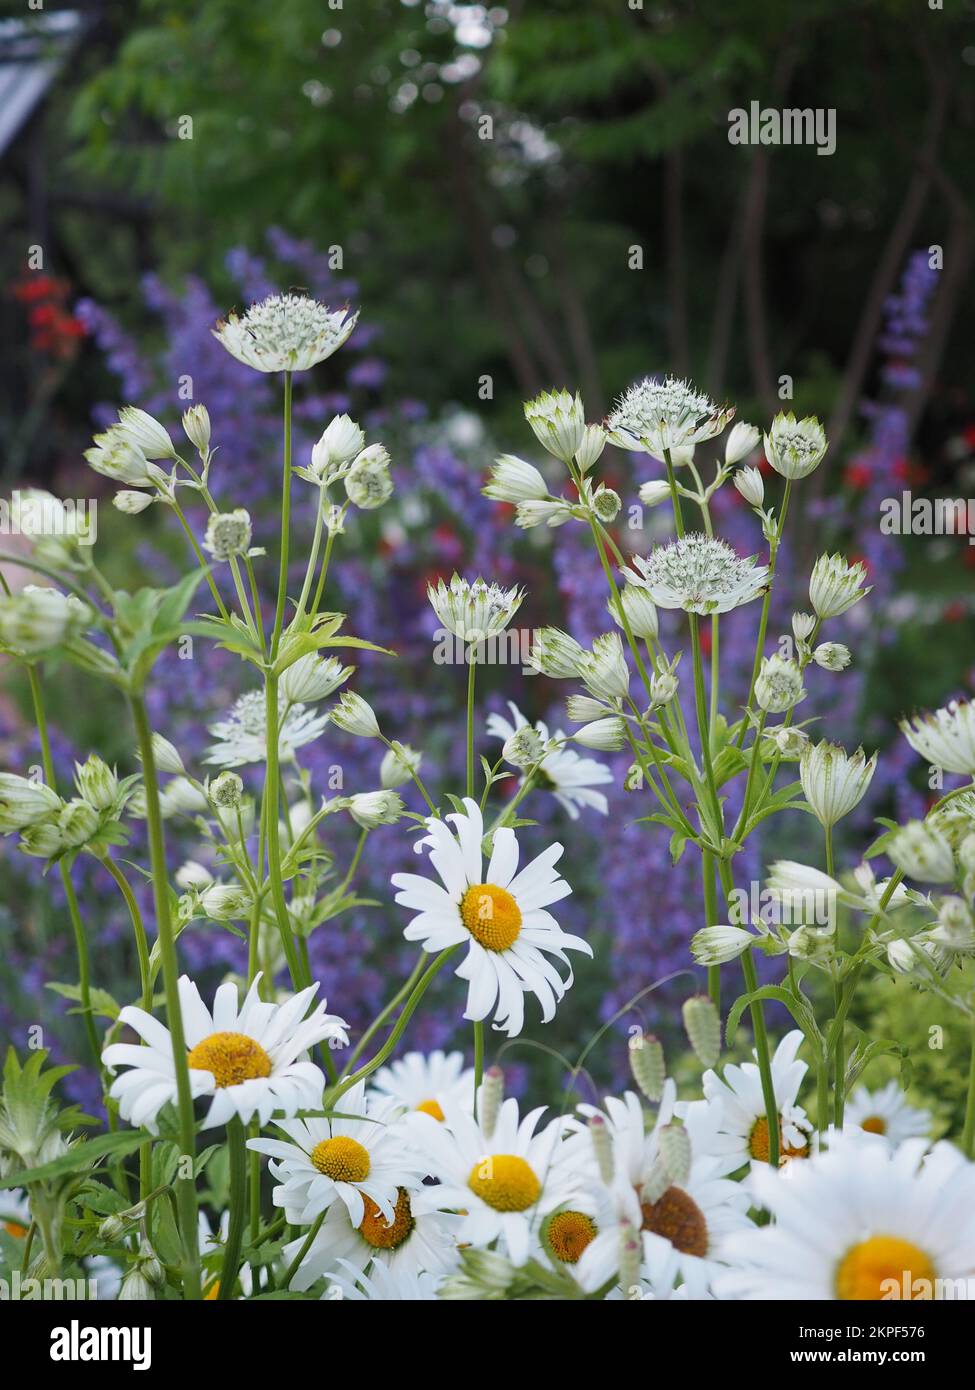 Astrantia major 'Alba' flowers in a perennial border with Leucanthemum 'Wirral Supreme' in the foreground and Salvia 'May Night' in the background Stock Photo